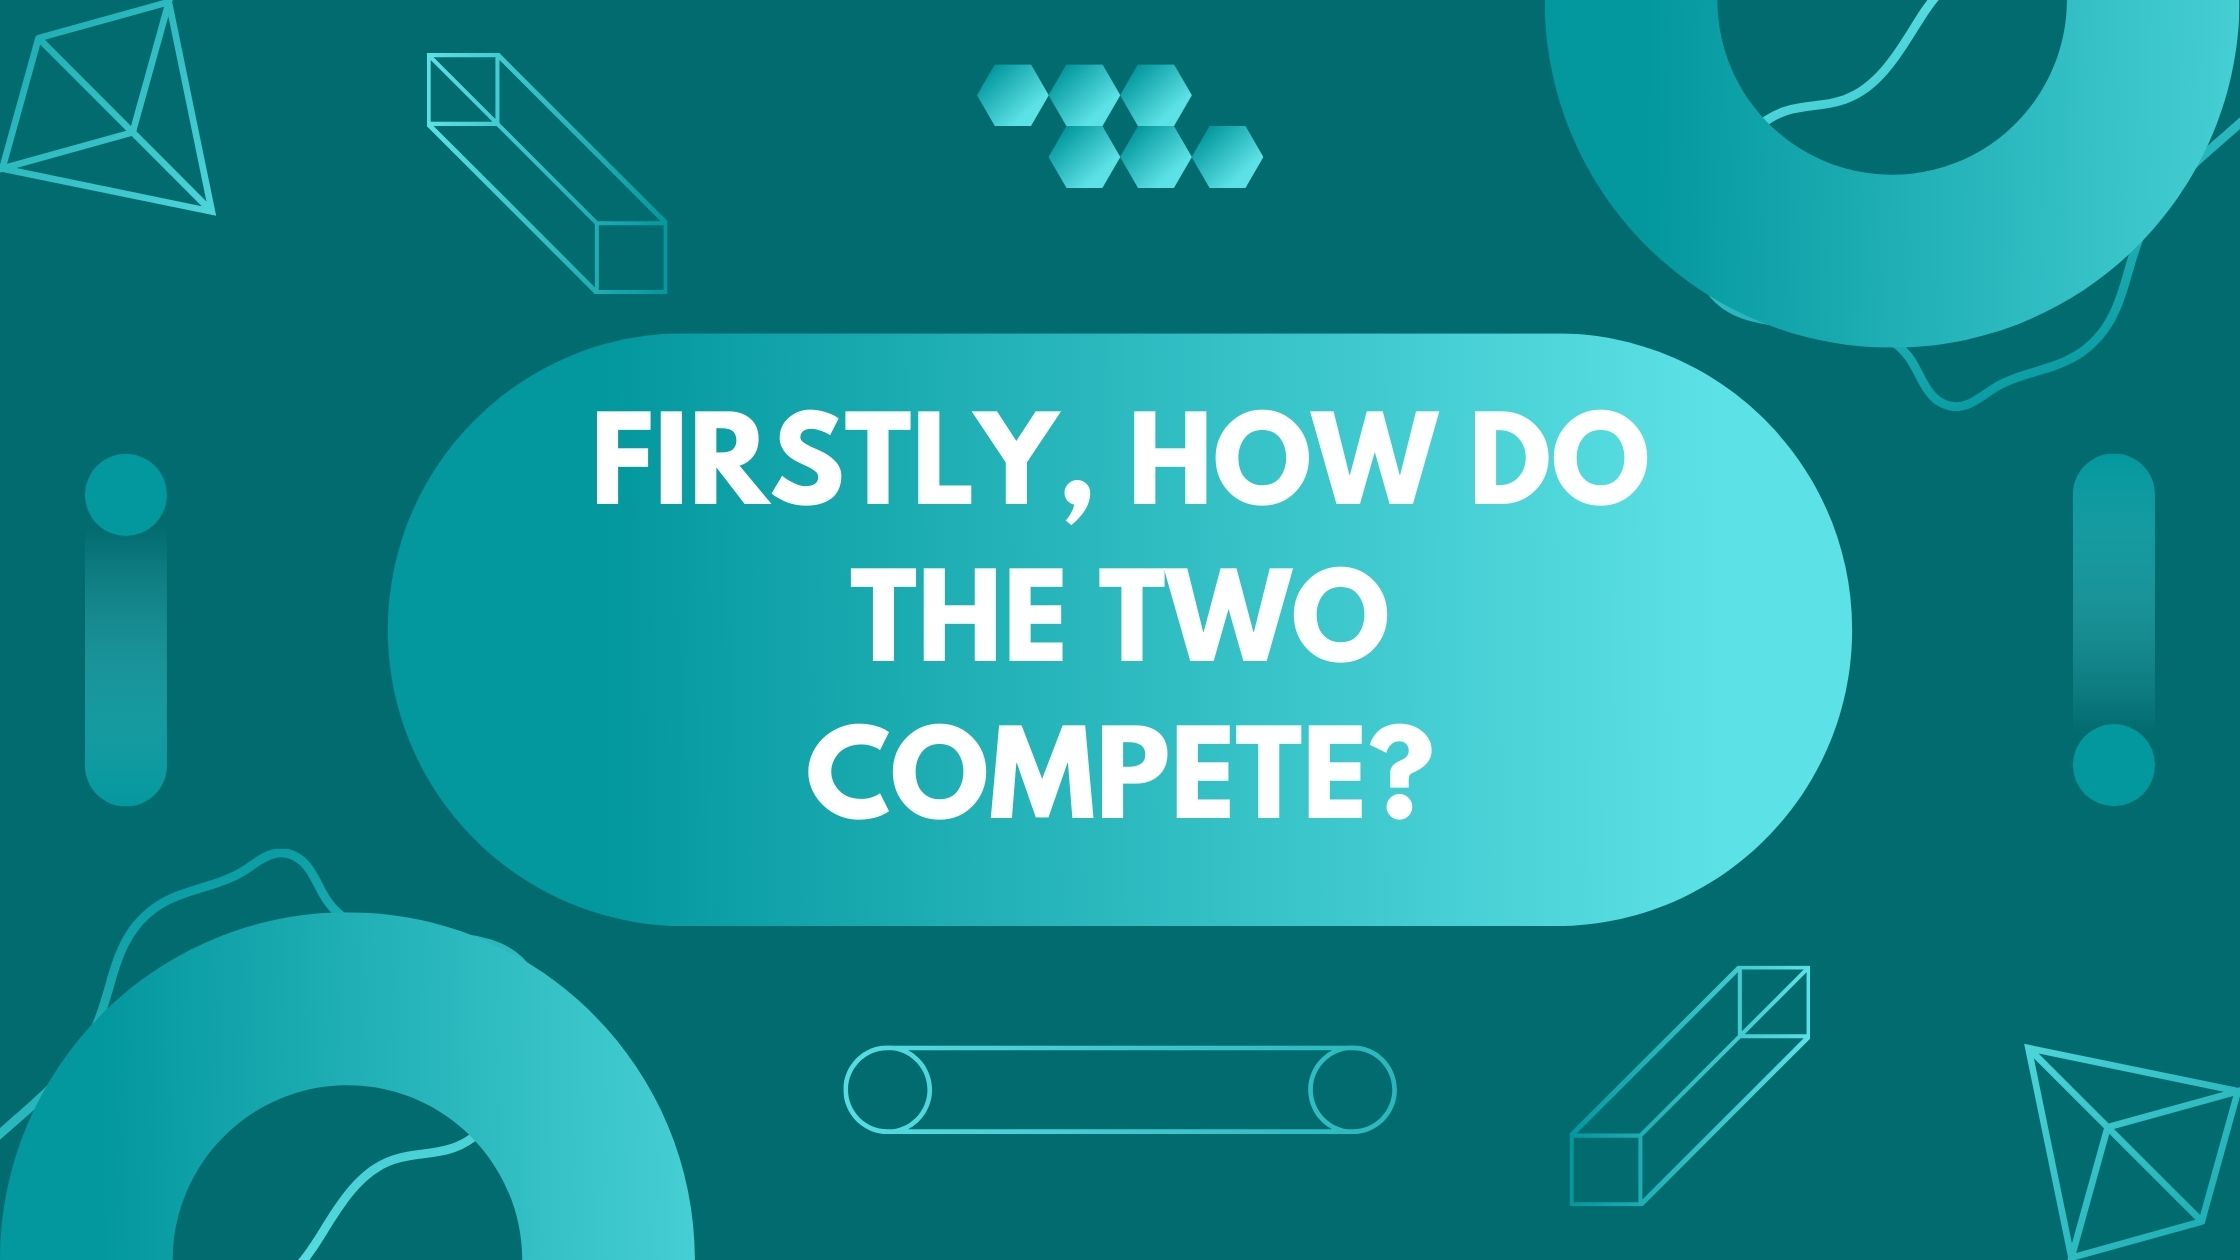 Firstly, how do the two compete?